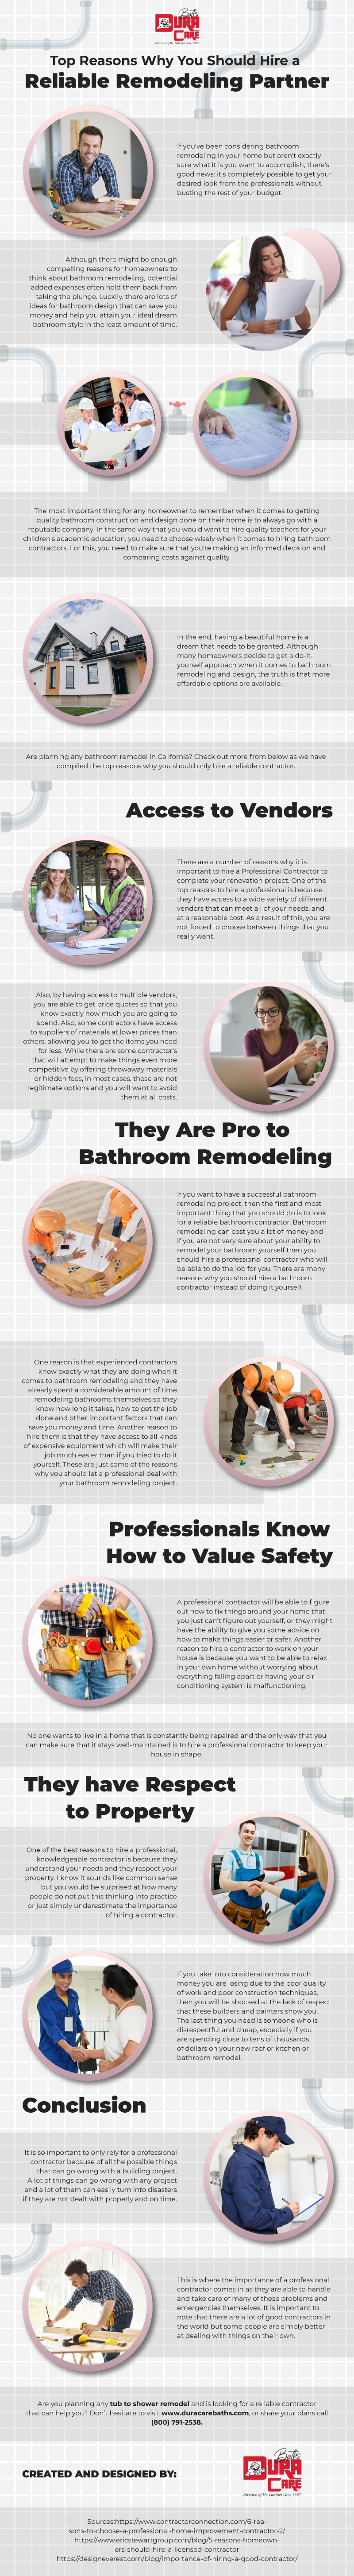 Top-Reasons-Why-You-Should-Hire-a-Reliable-Remodeling-Partner